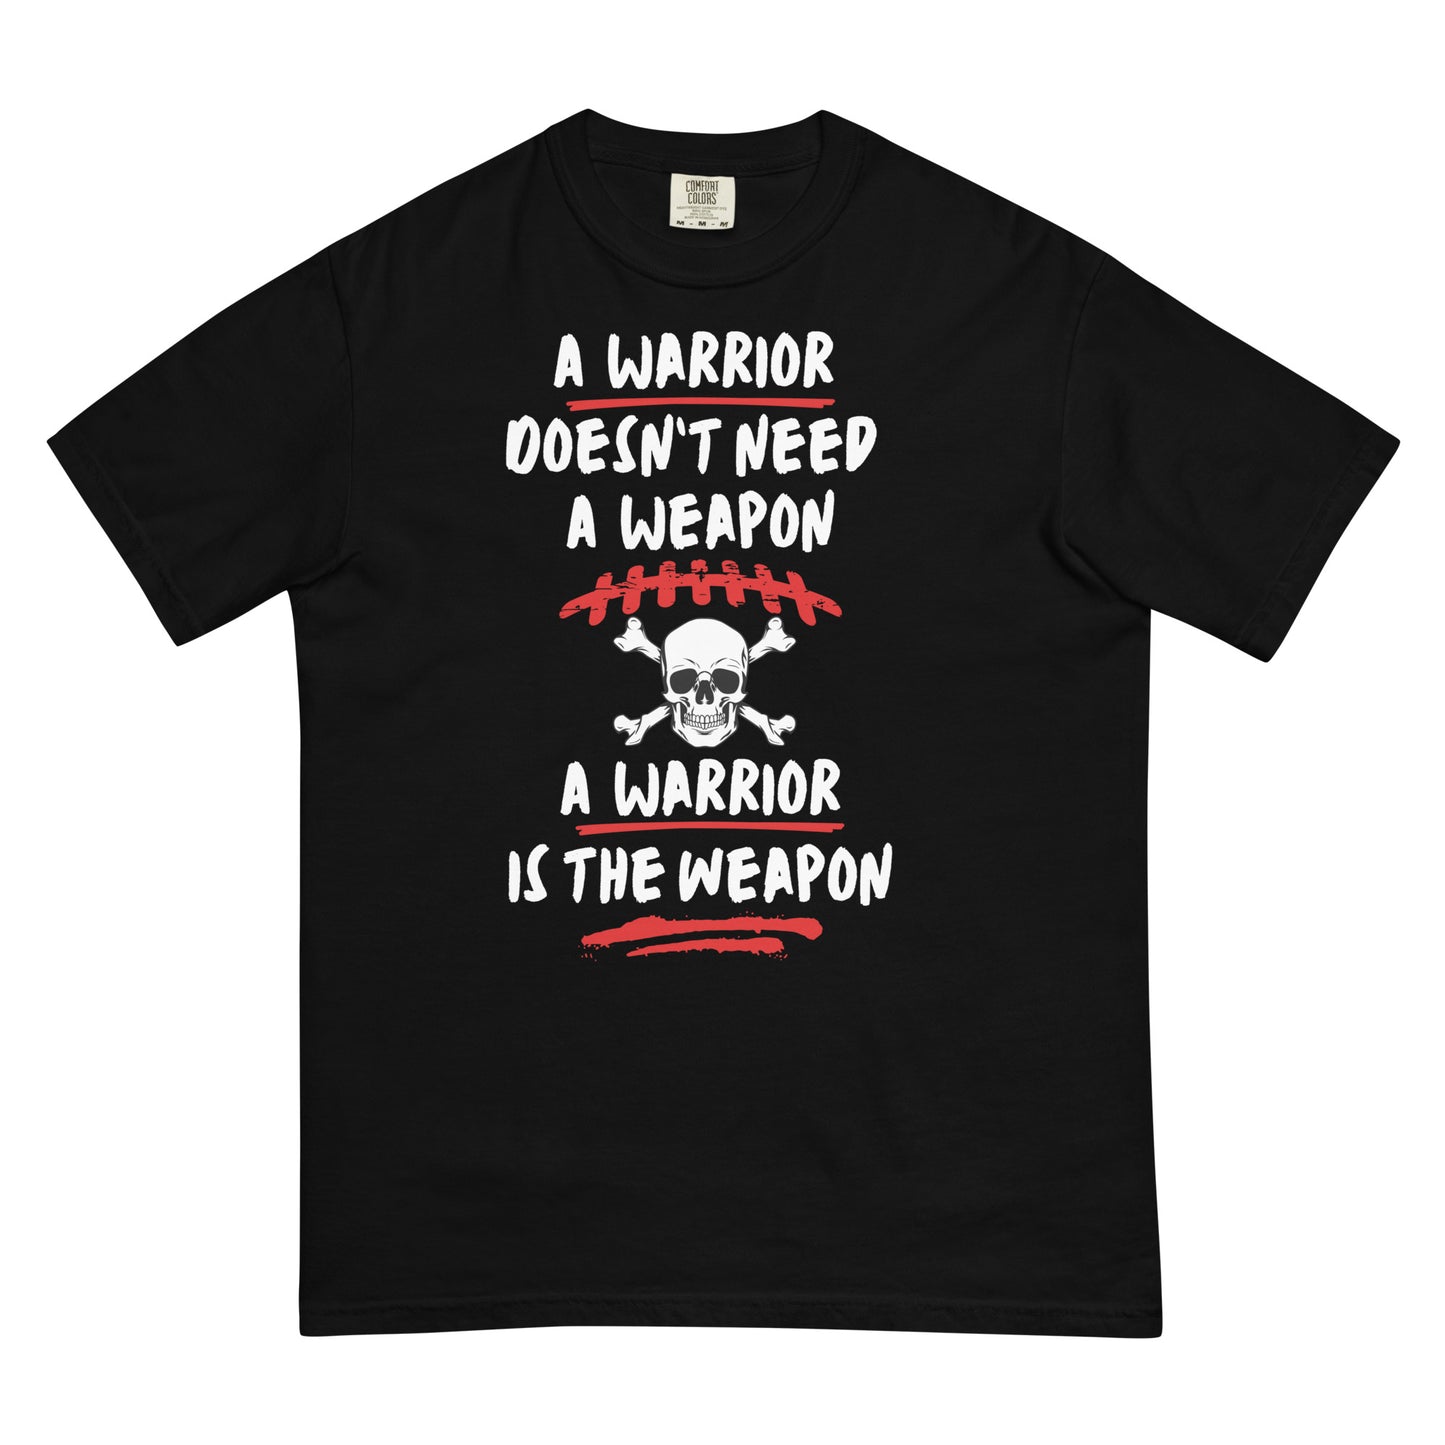 A Warrior IS THE Weapon T-shirt